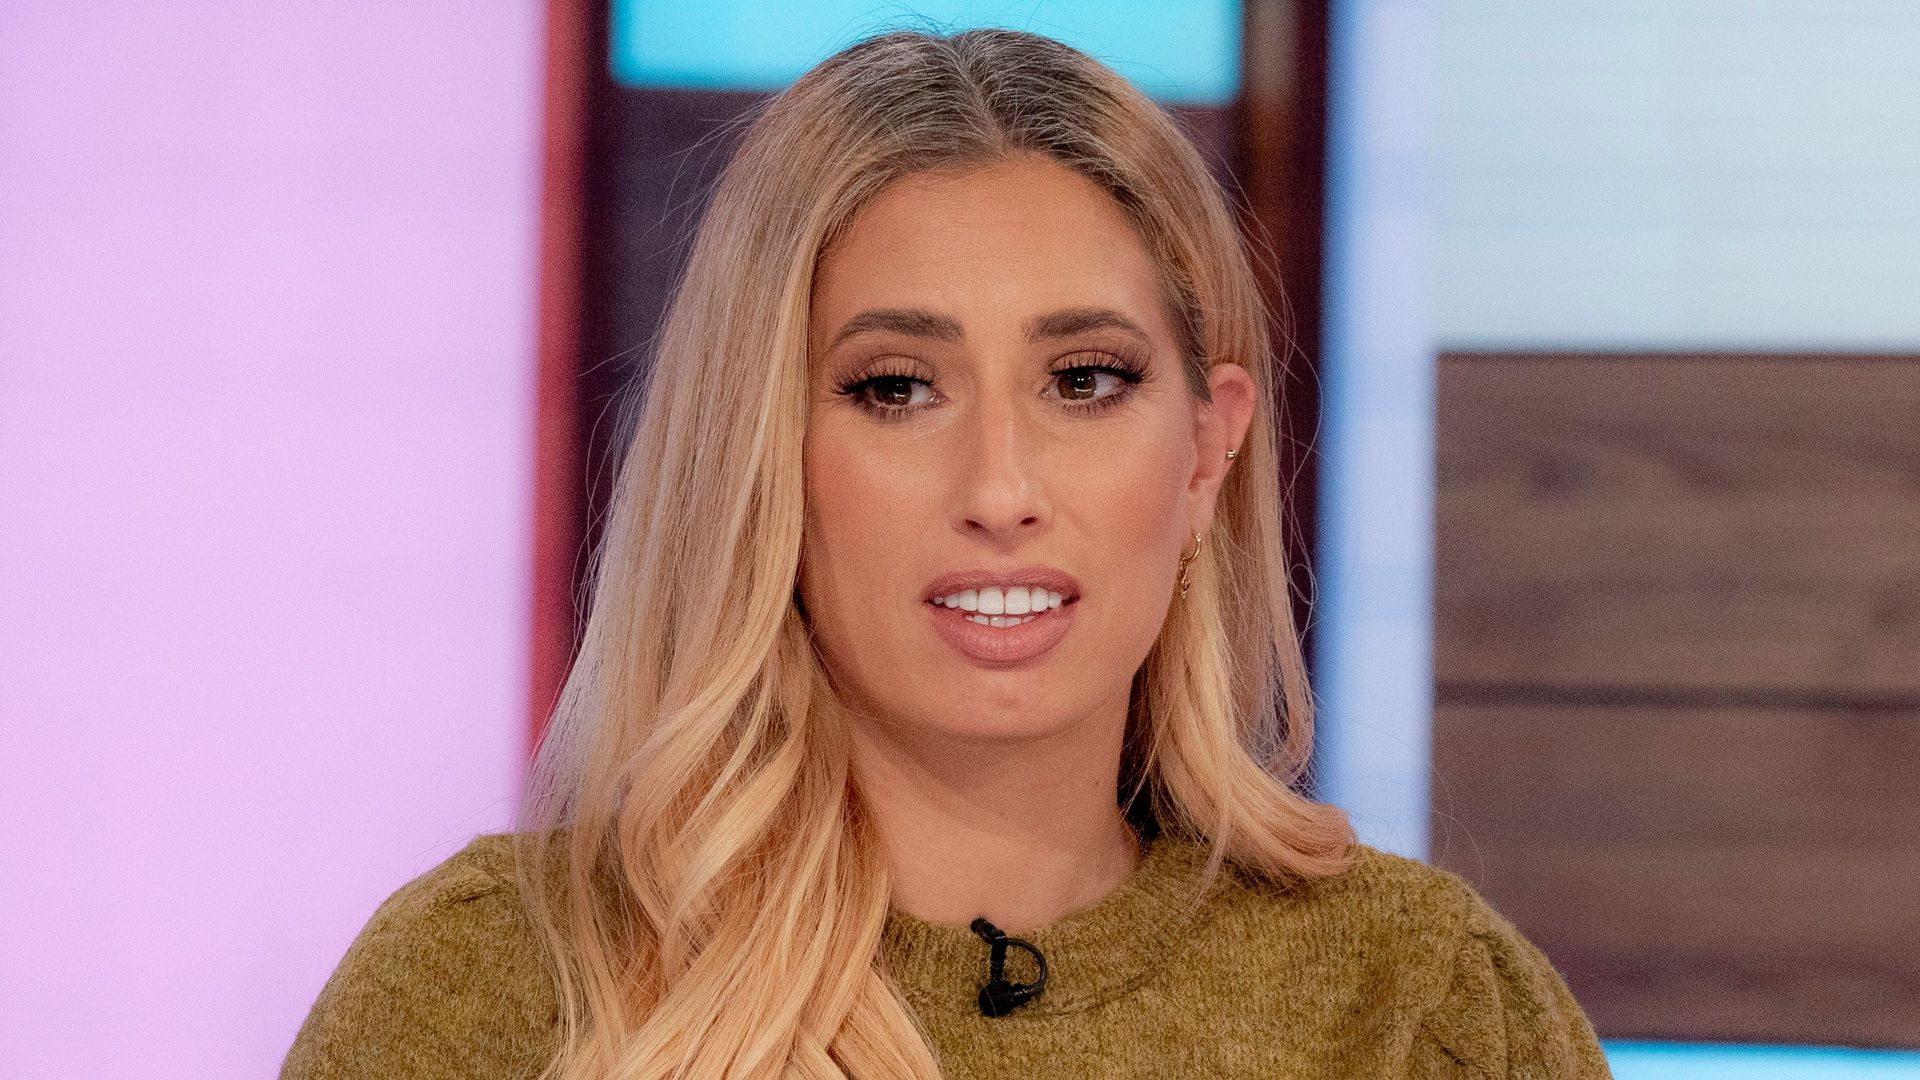 Stacey Solomon looking concerned on the set of Loose Women